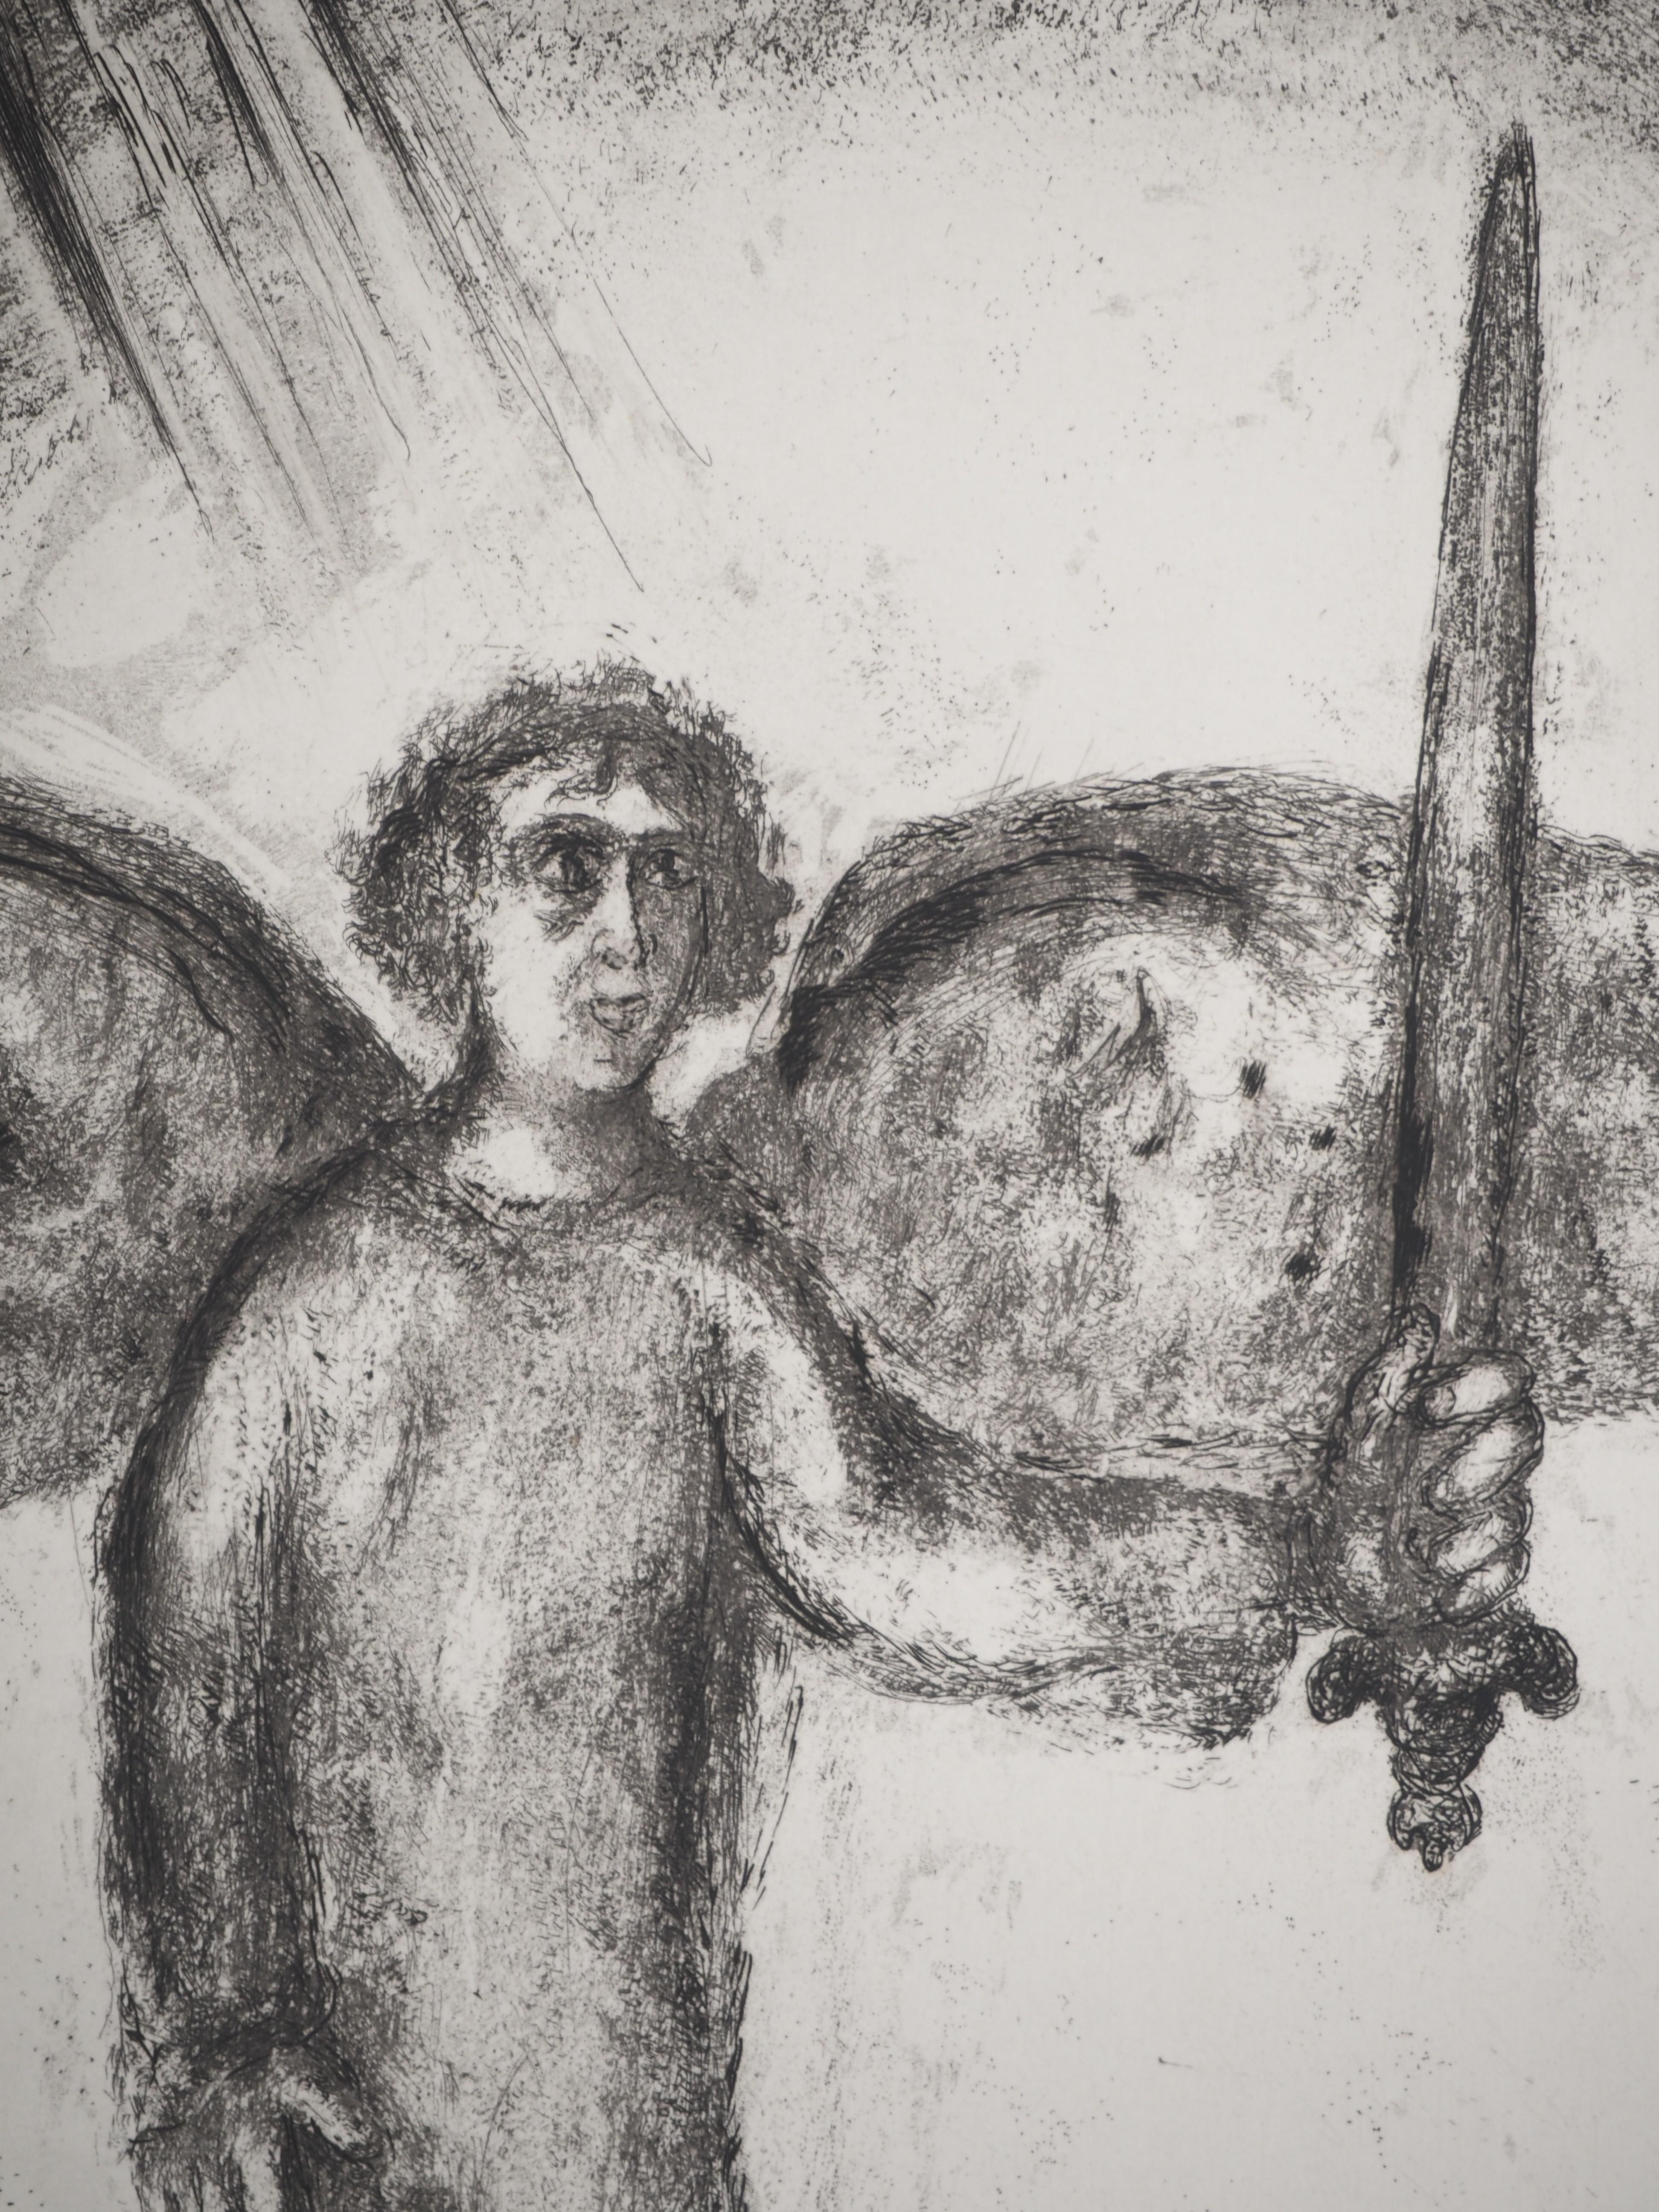 Marc Chagall (1887-1958)
Bible : Joshua with the Angel with the sword (Josué devant l'ange à l'épée), 1939

Original etching
Printed signature in the plate
On Montval vellum, 44 x 33.5 cm (c. 17.3 x 13.1 inch)

INFORMATION: Published by Vollard /